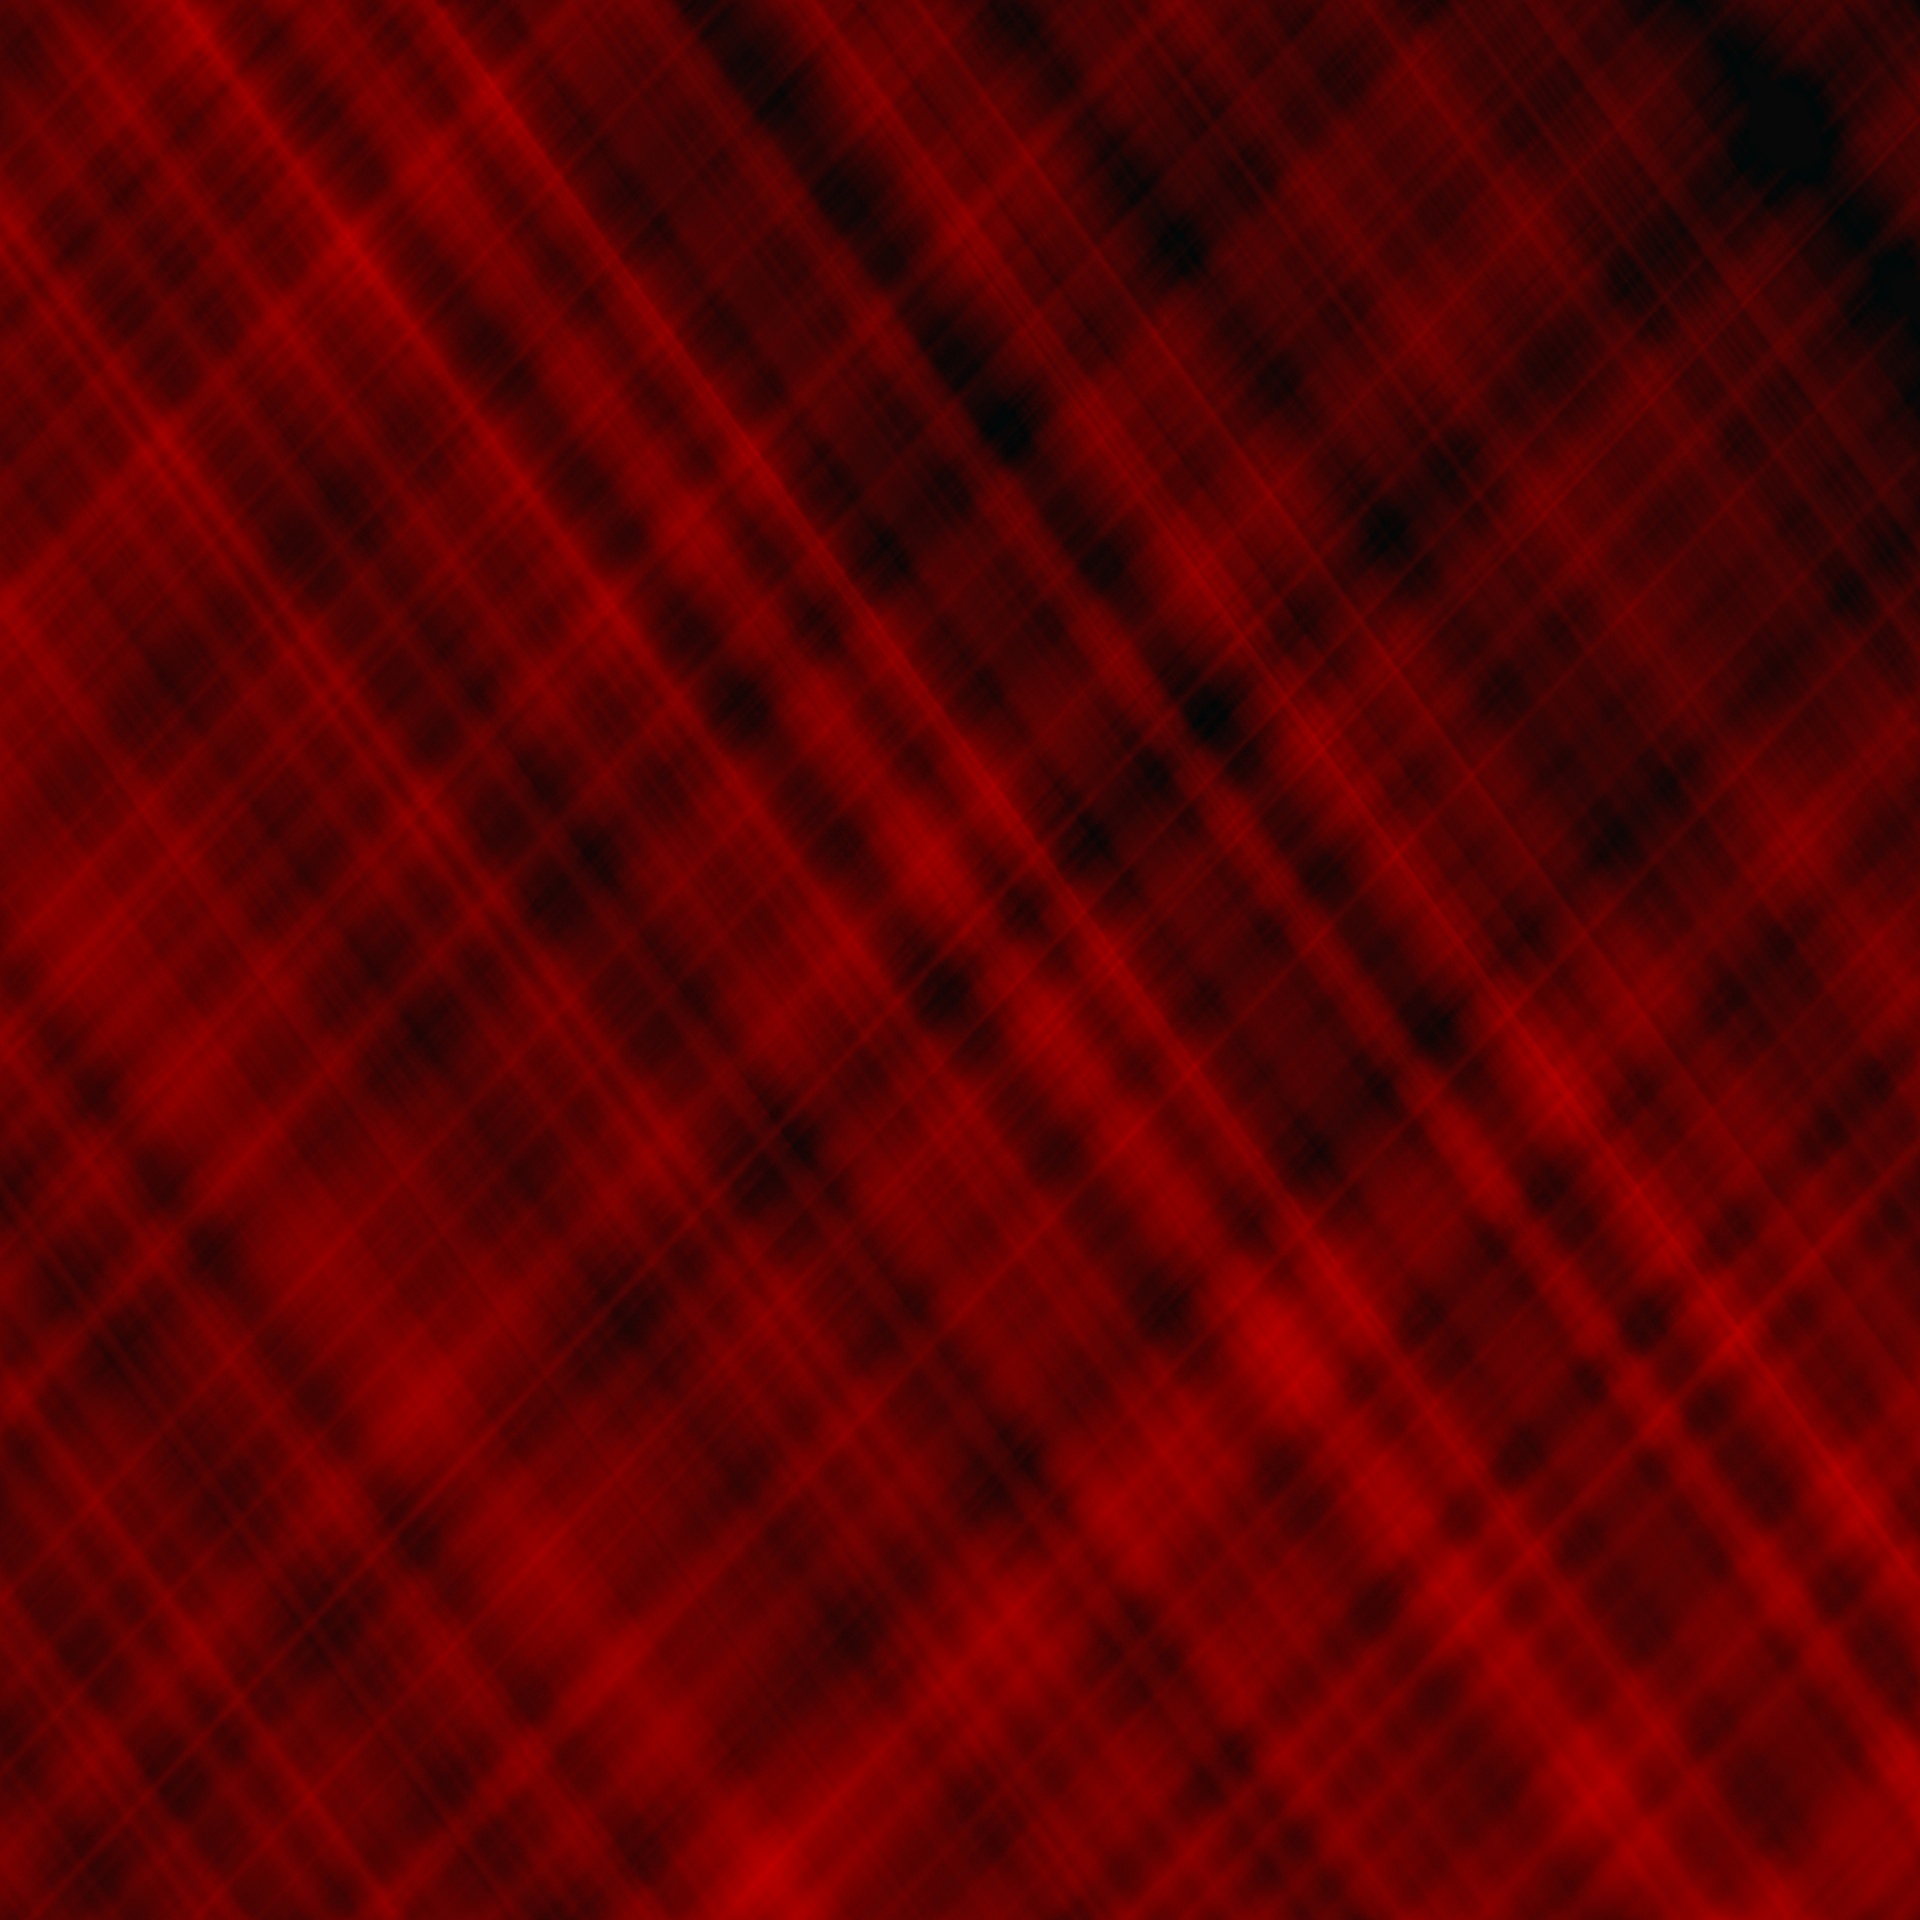 Red Plaid Pattern For Background. Plaid Image Stock Photo, Picture